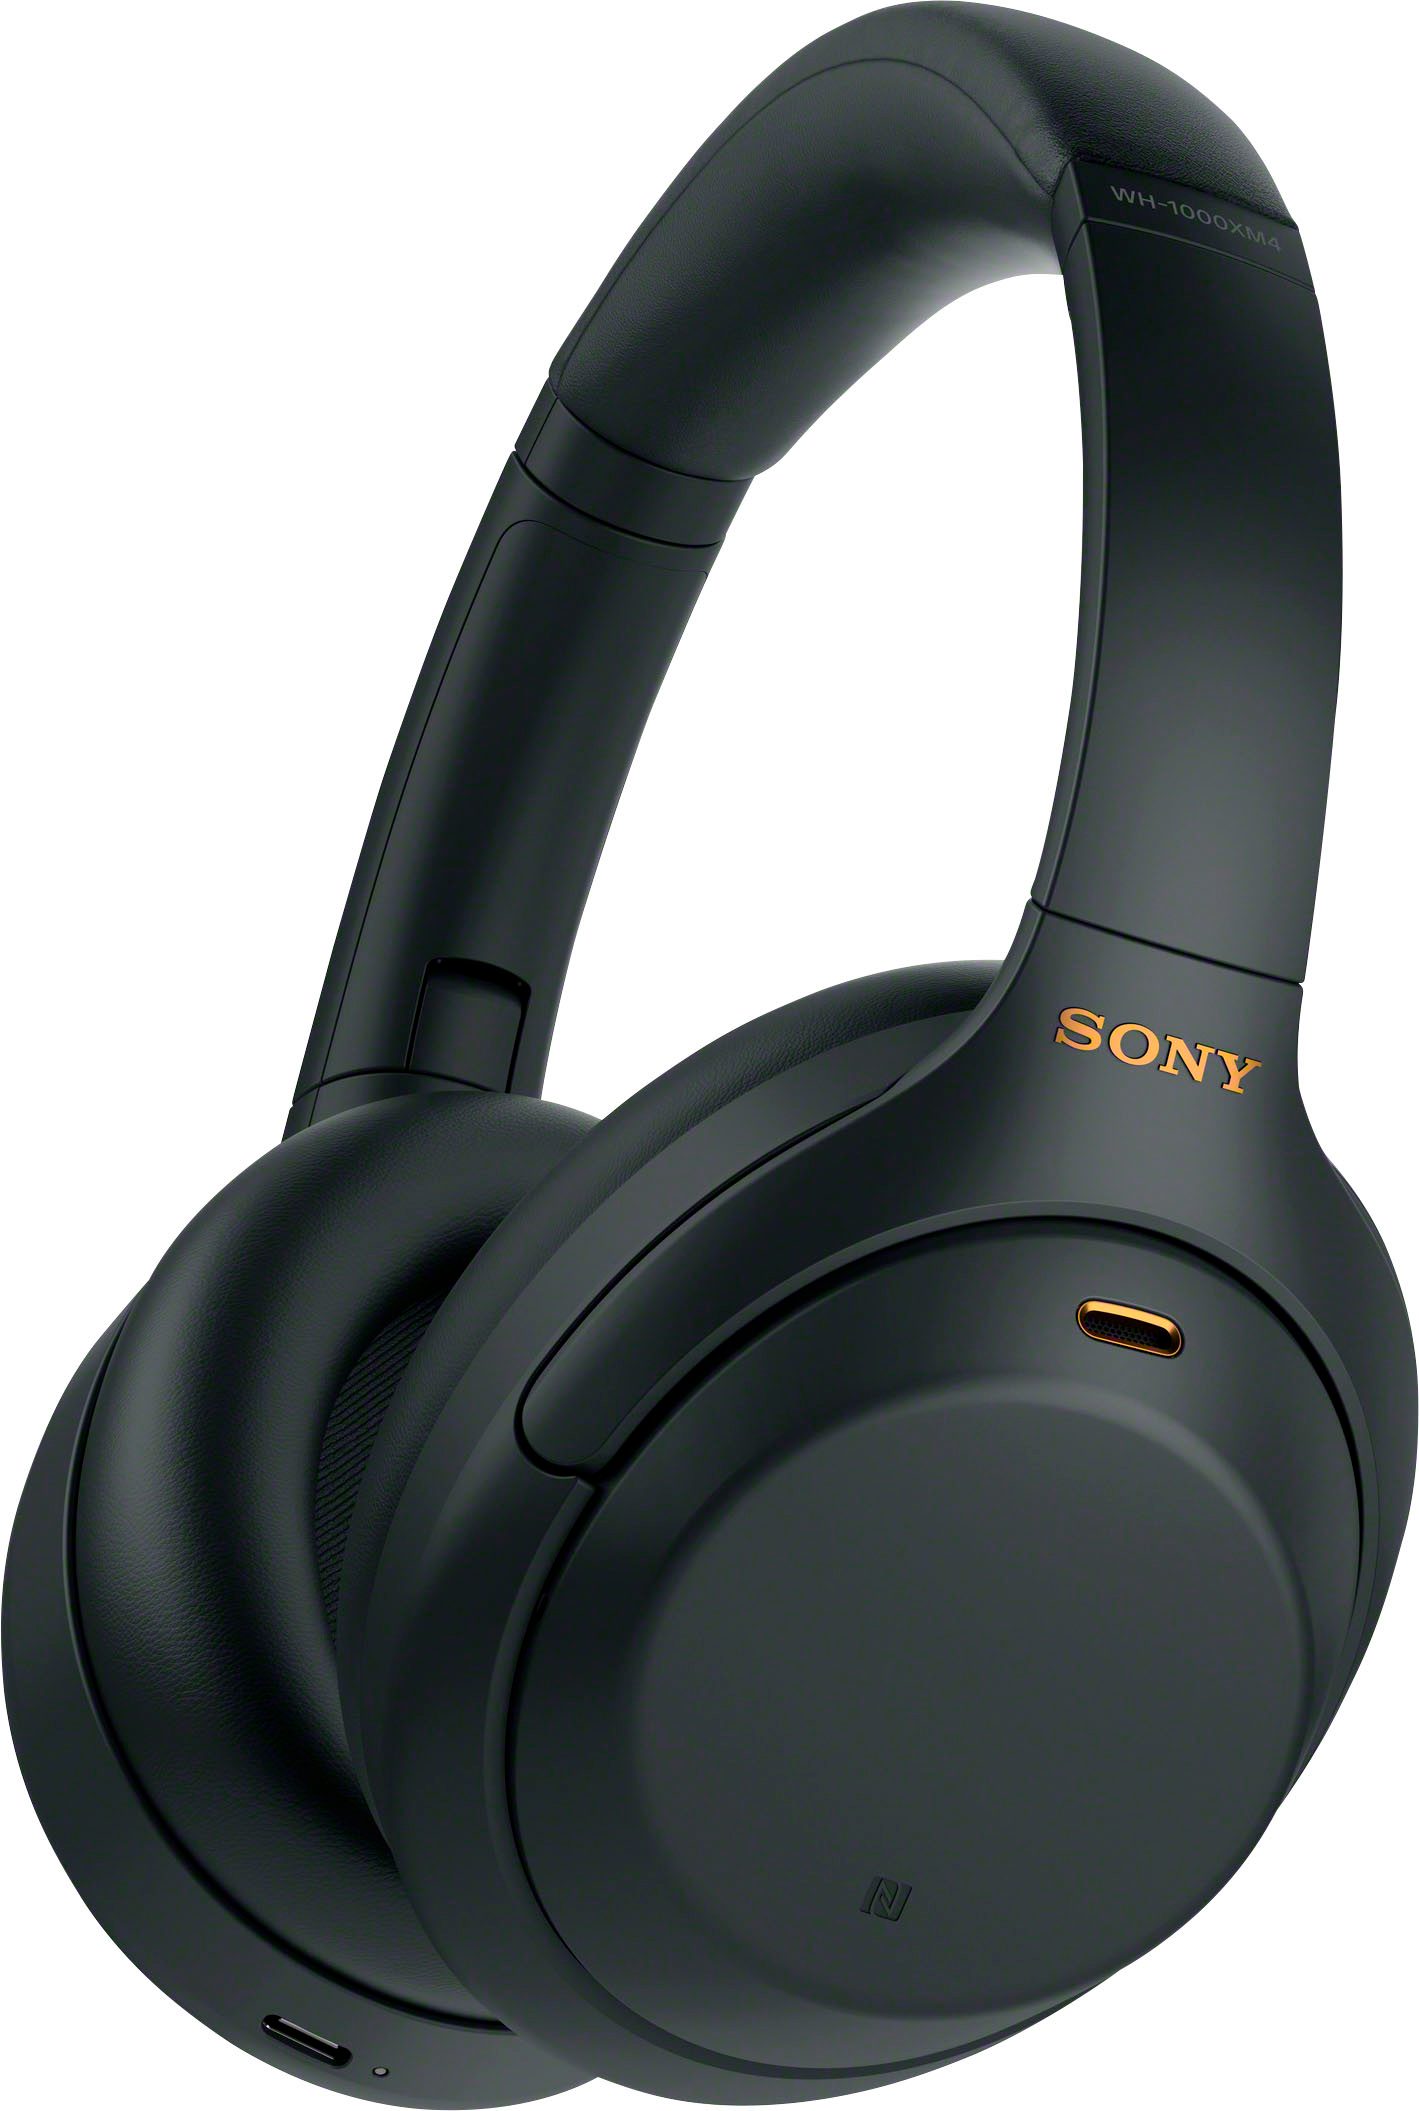 Zoom out on Angle Zoom. Sony - WH-1000XM4 Wireless Noise-Cancelling Over-the-Ear Headphones - Black.